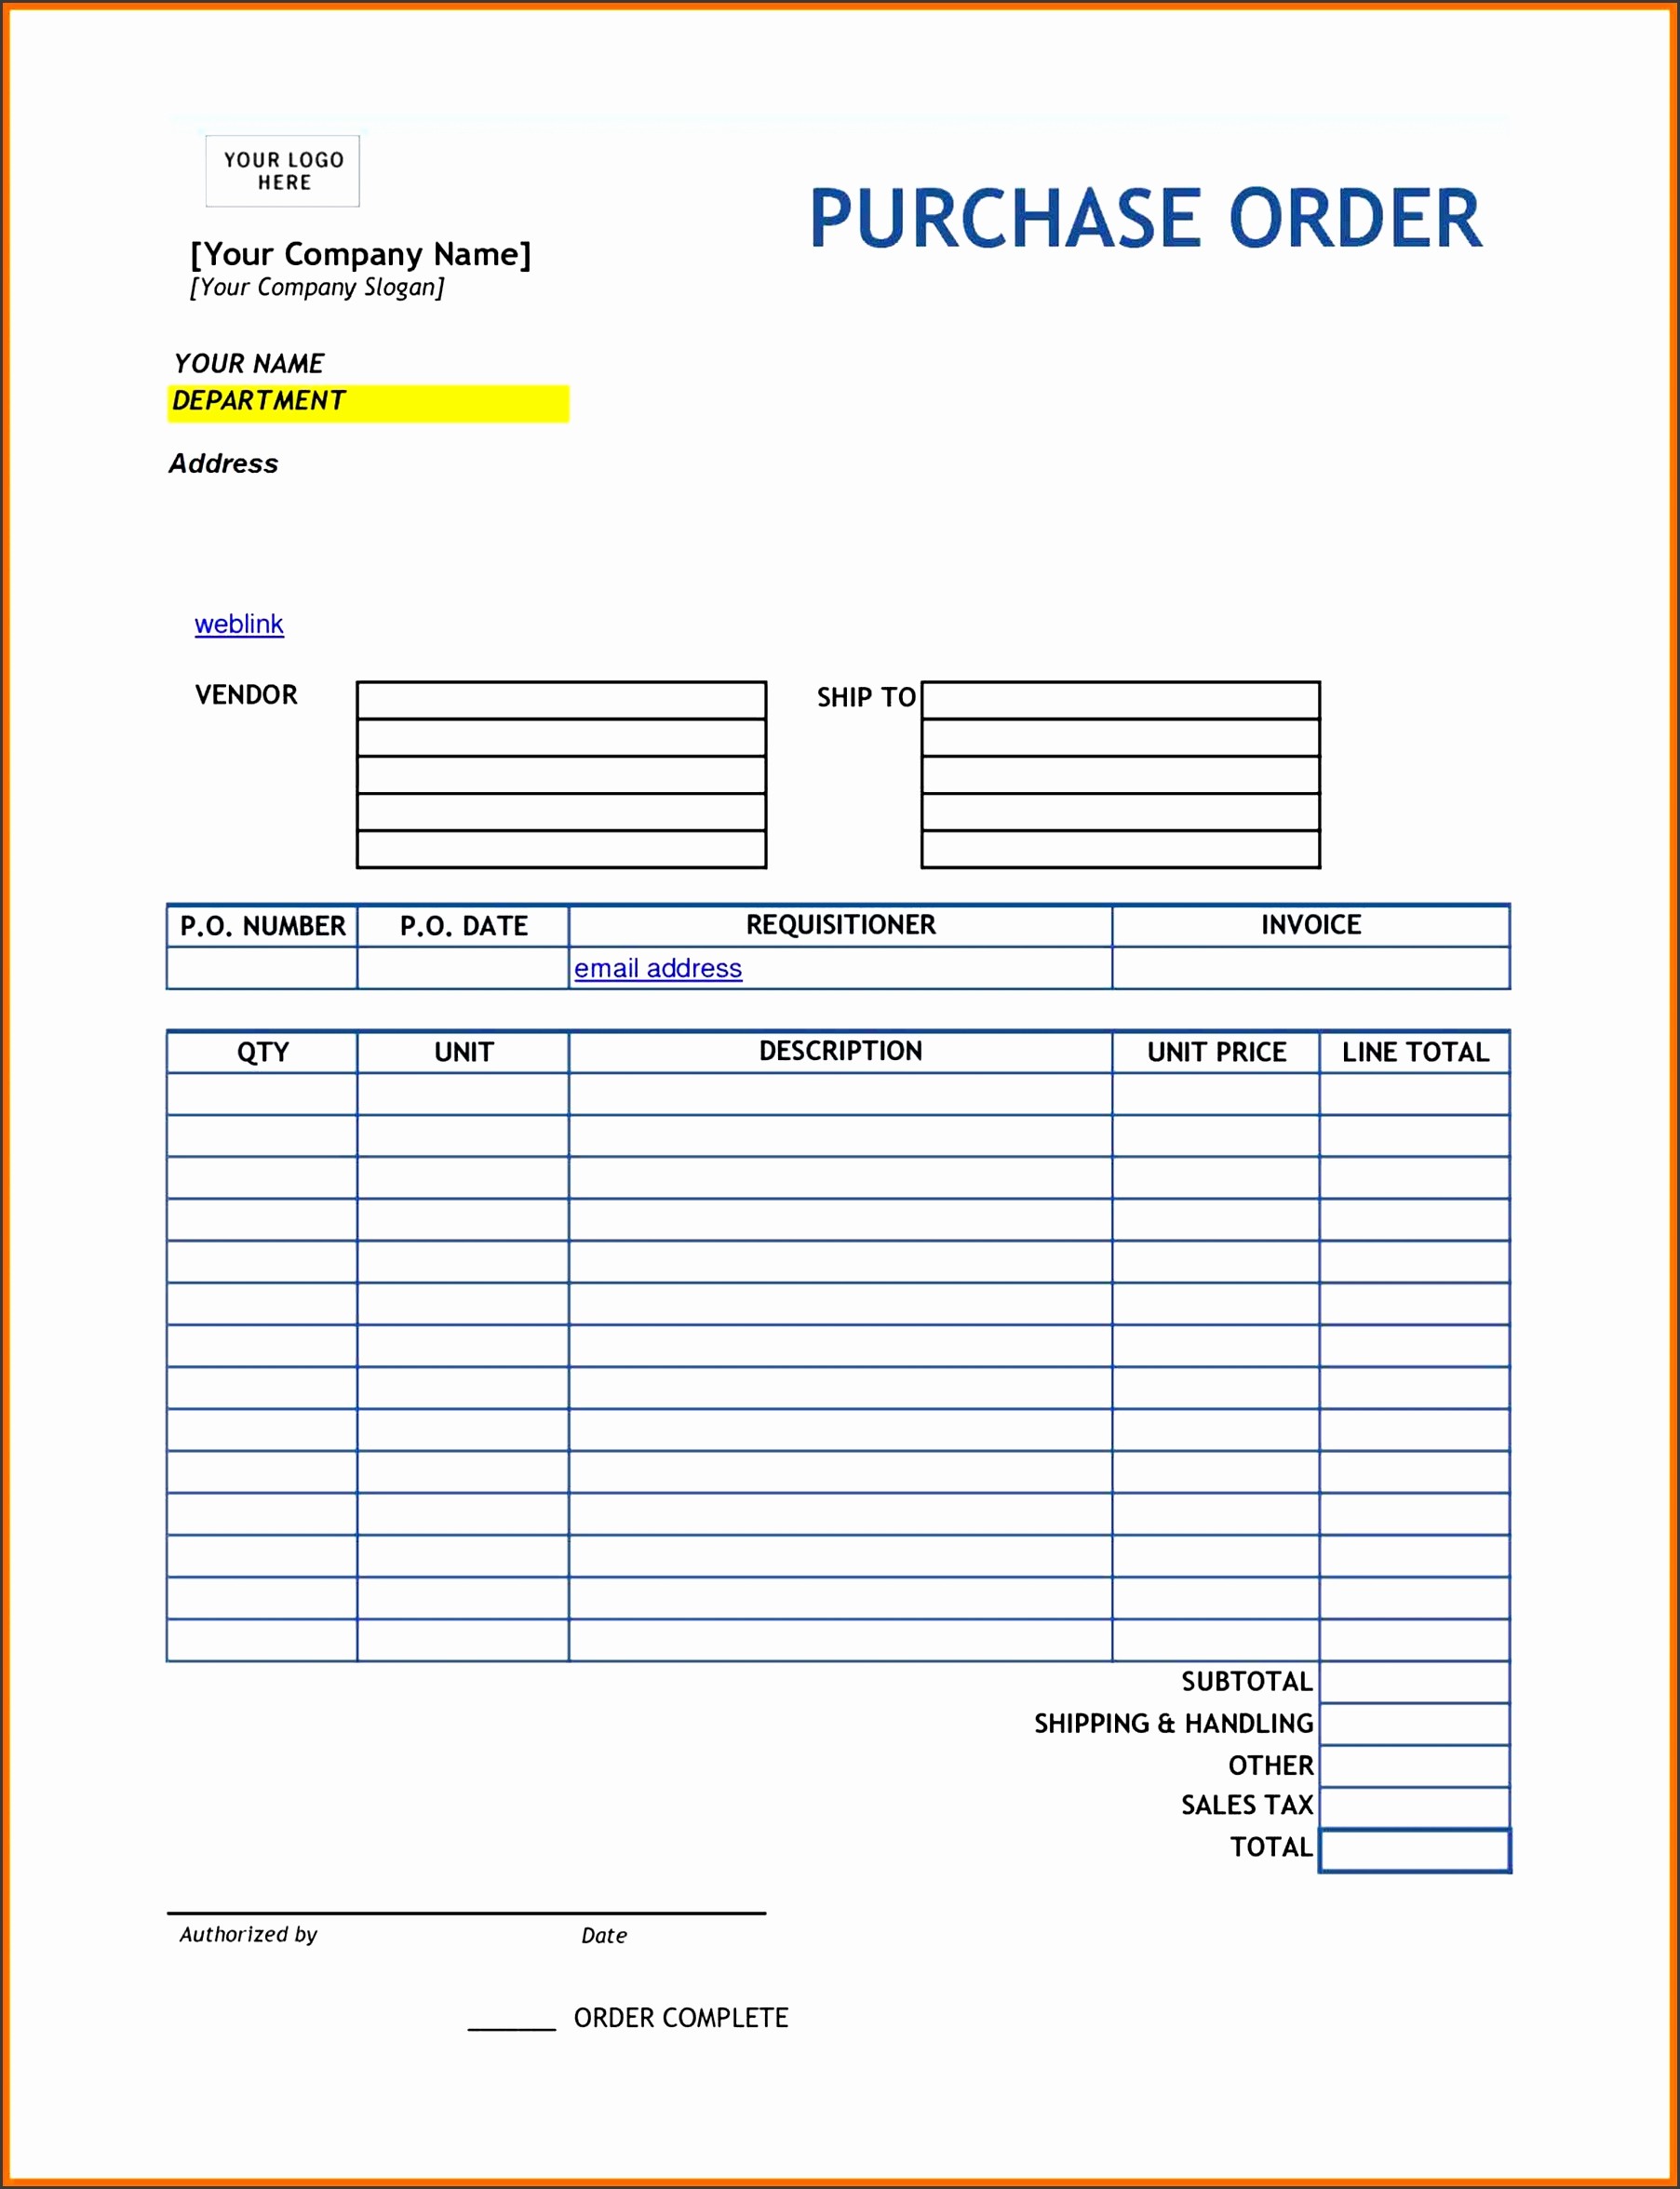 Blank order form Template Word Unique 10 Editable Purchase order Template Sampletemplatess